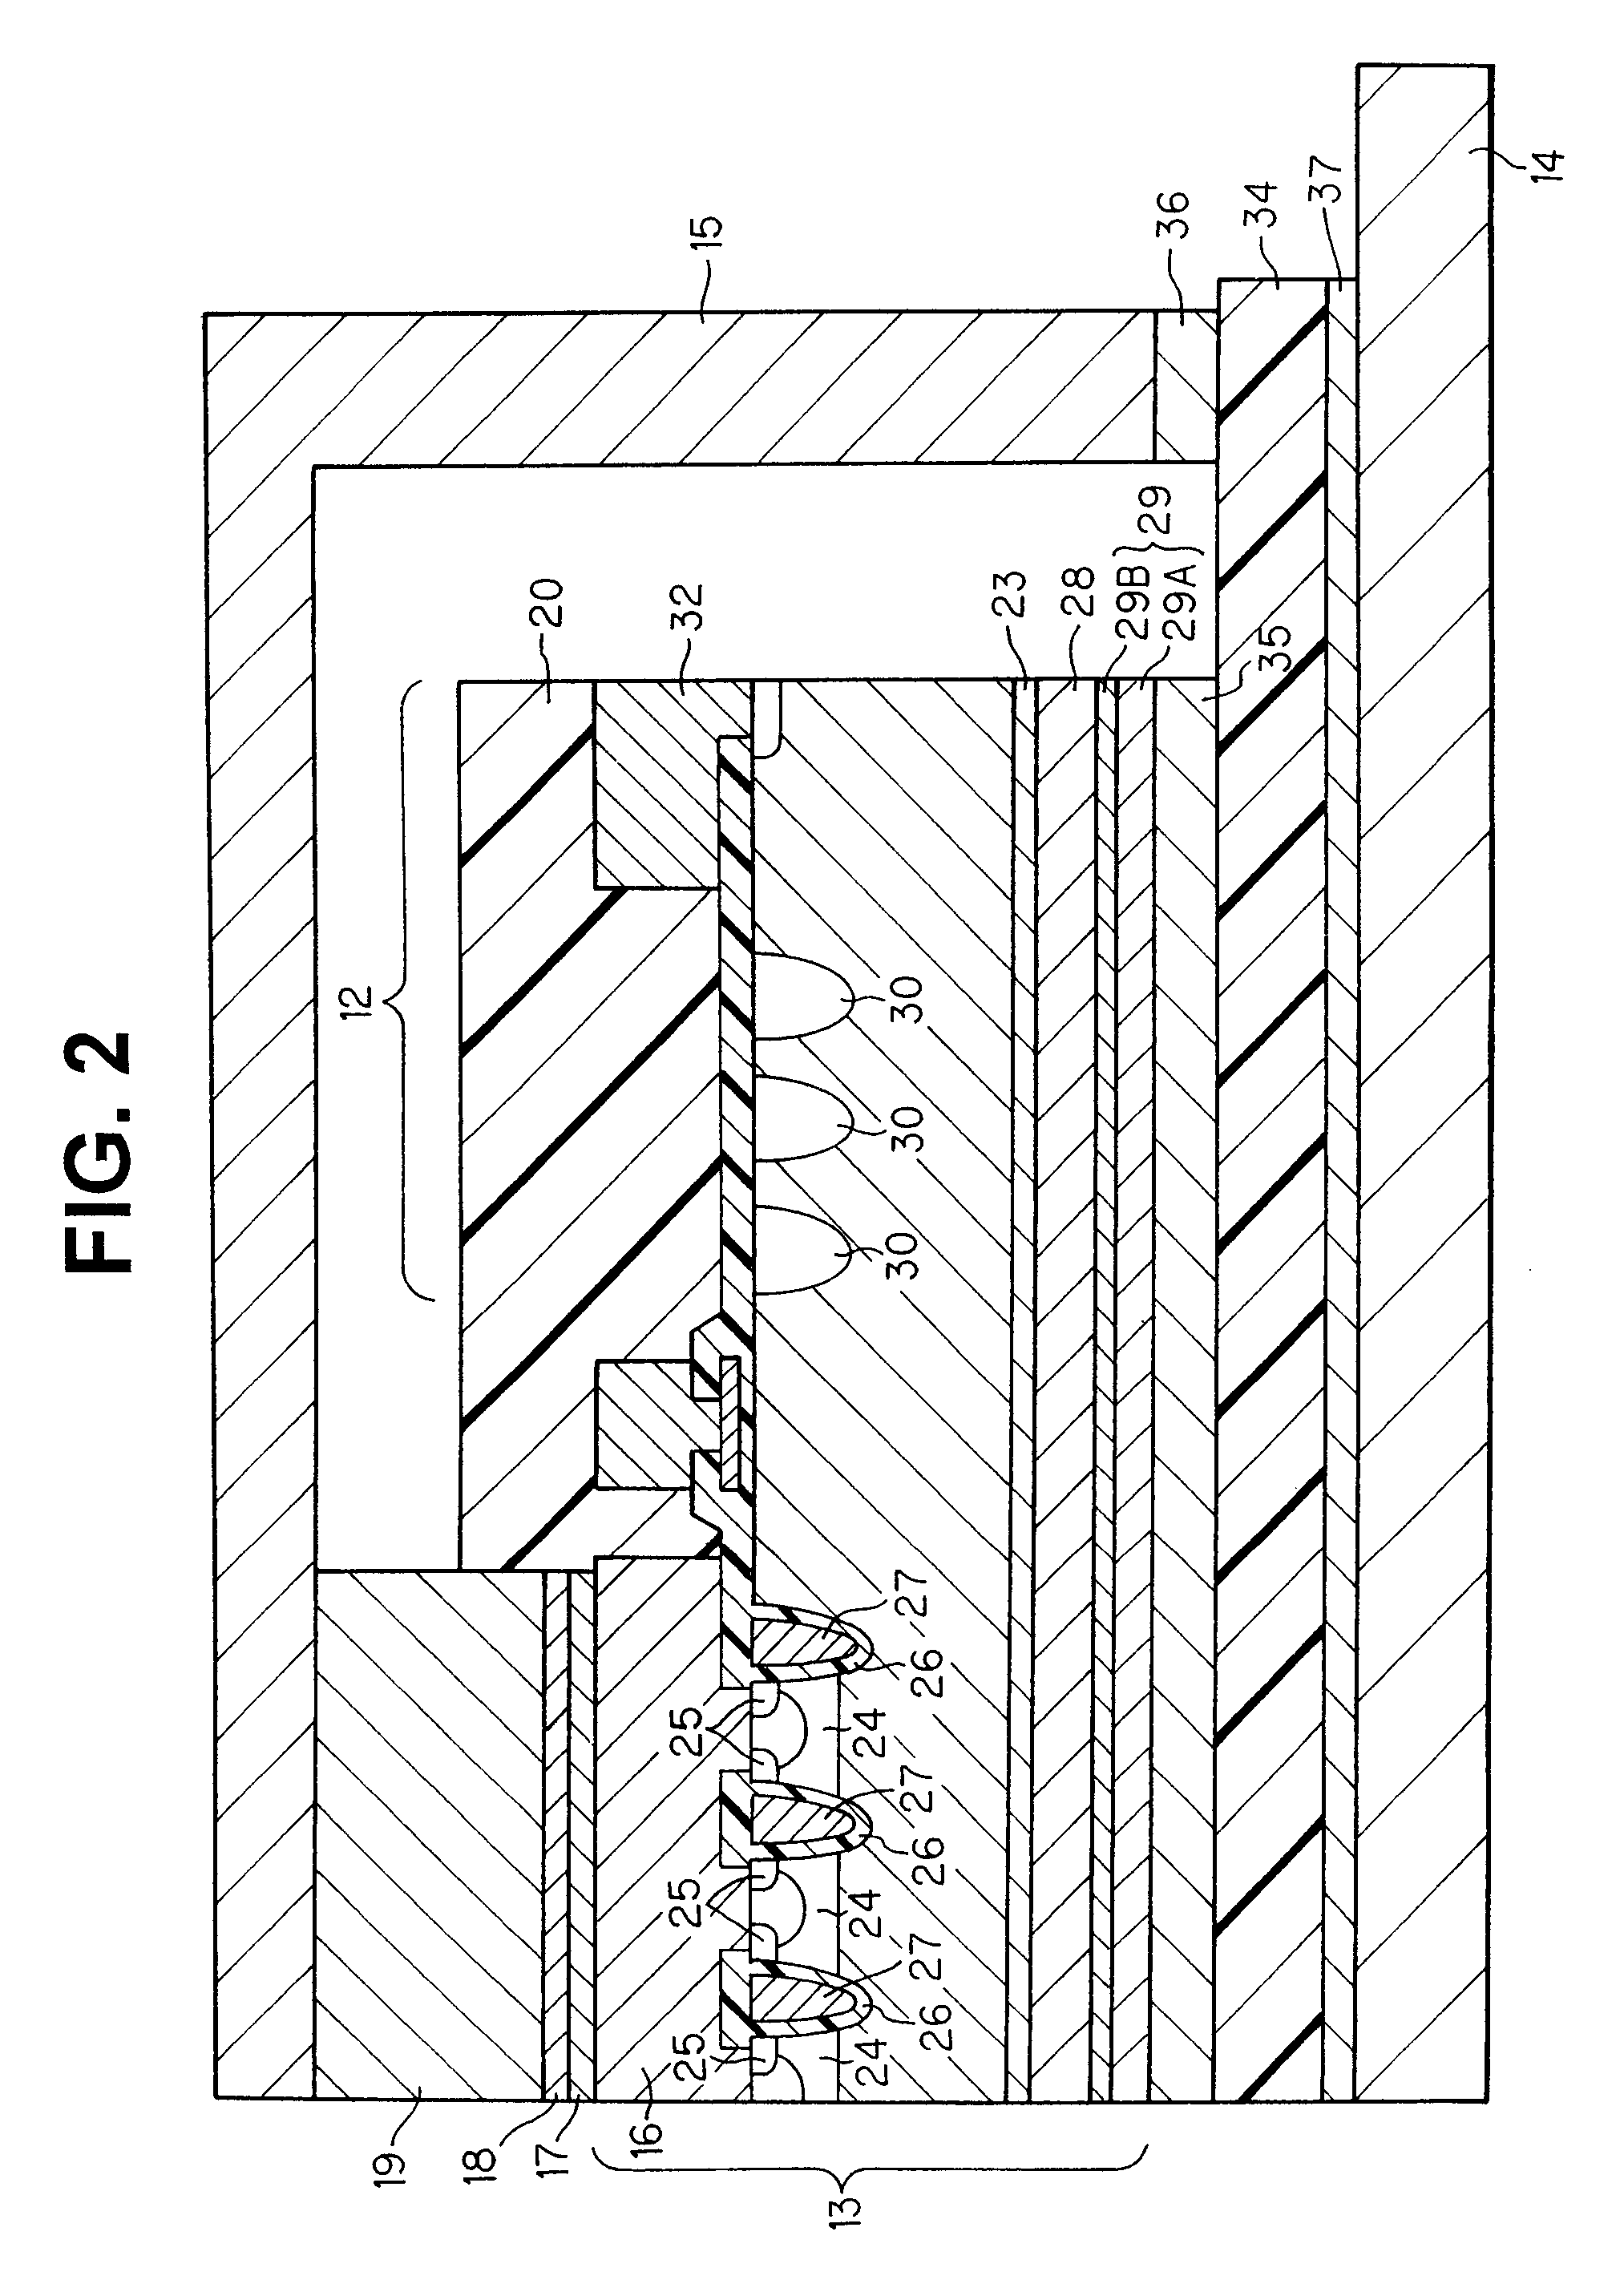 Semiconductor device module structure